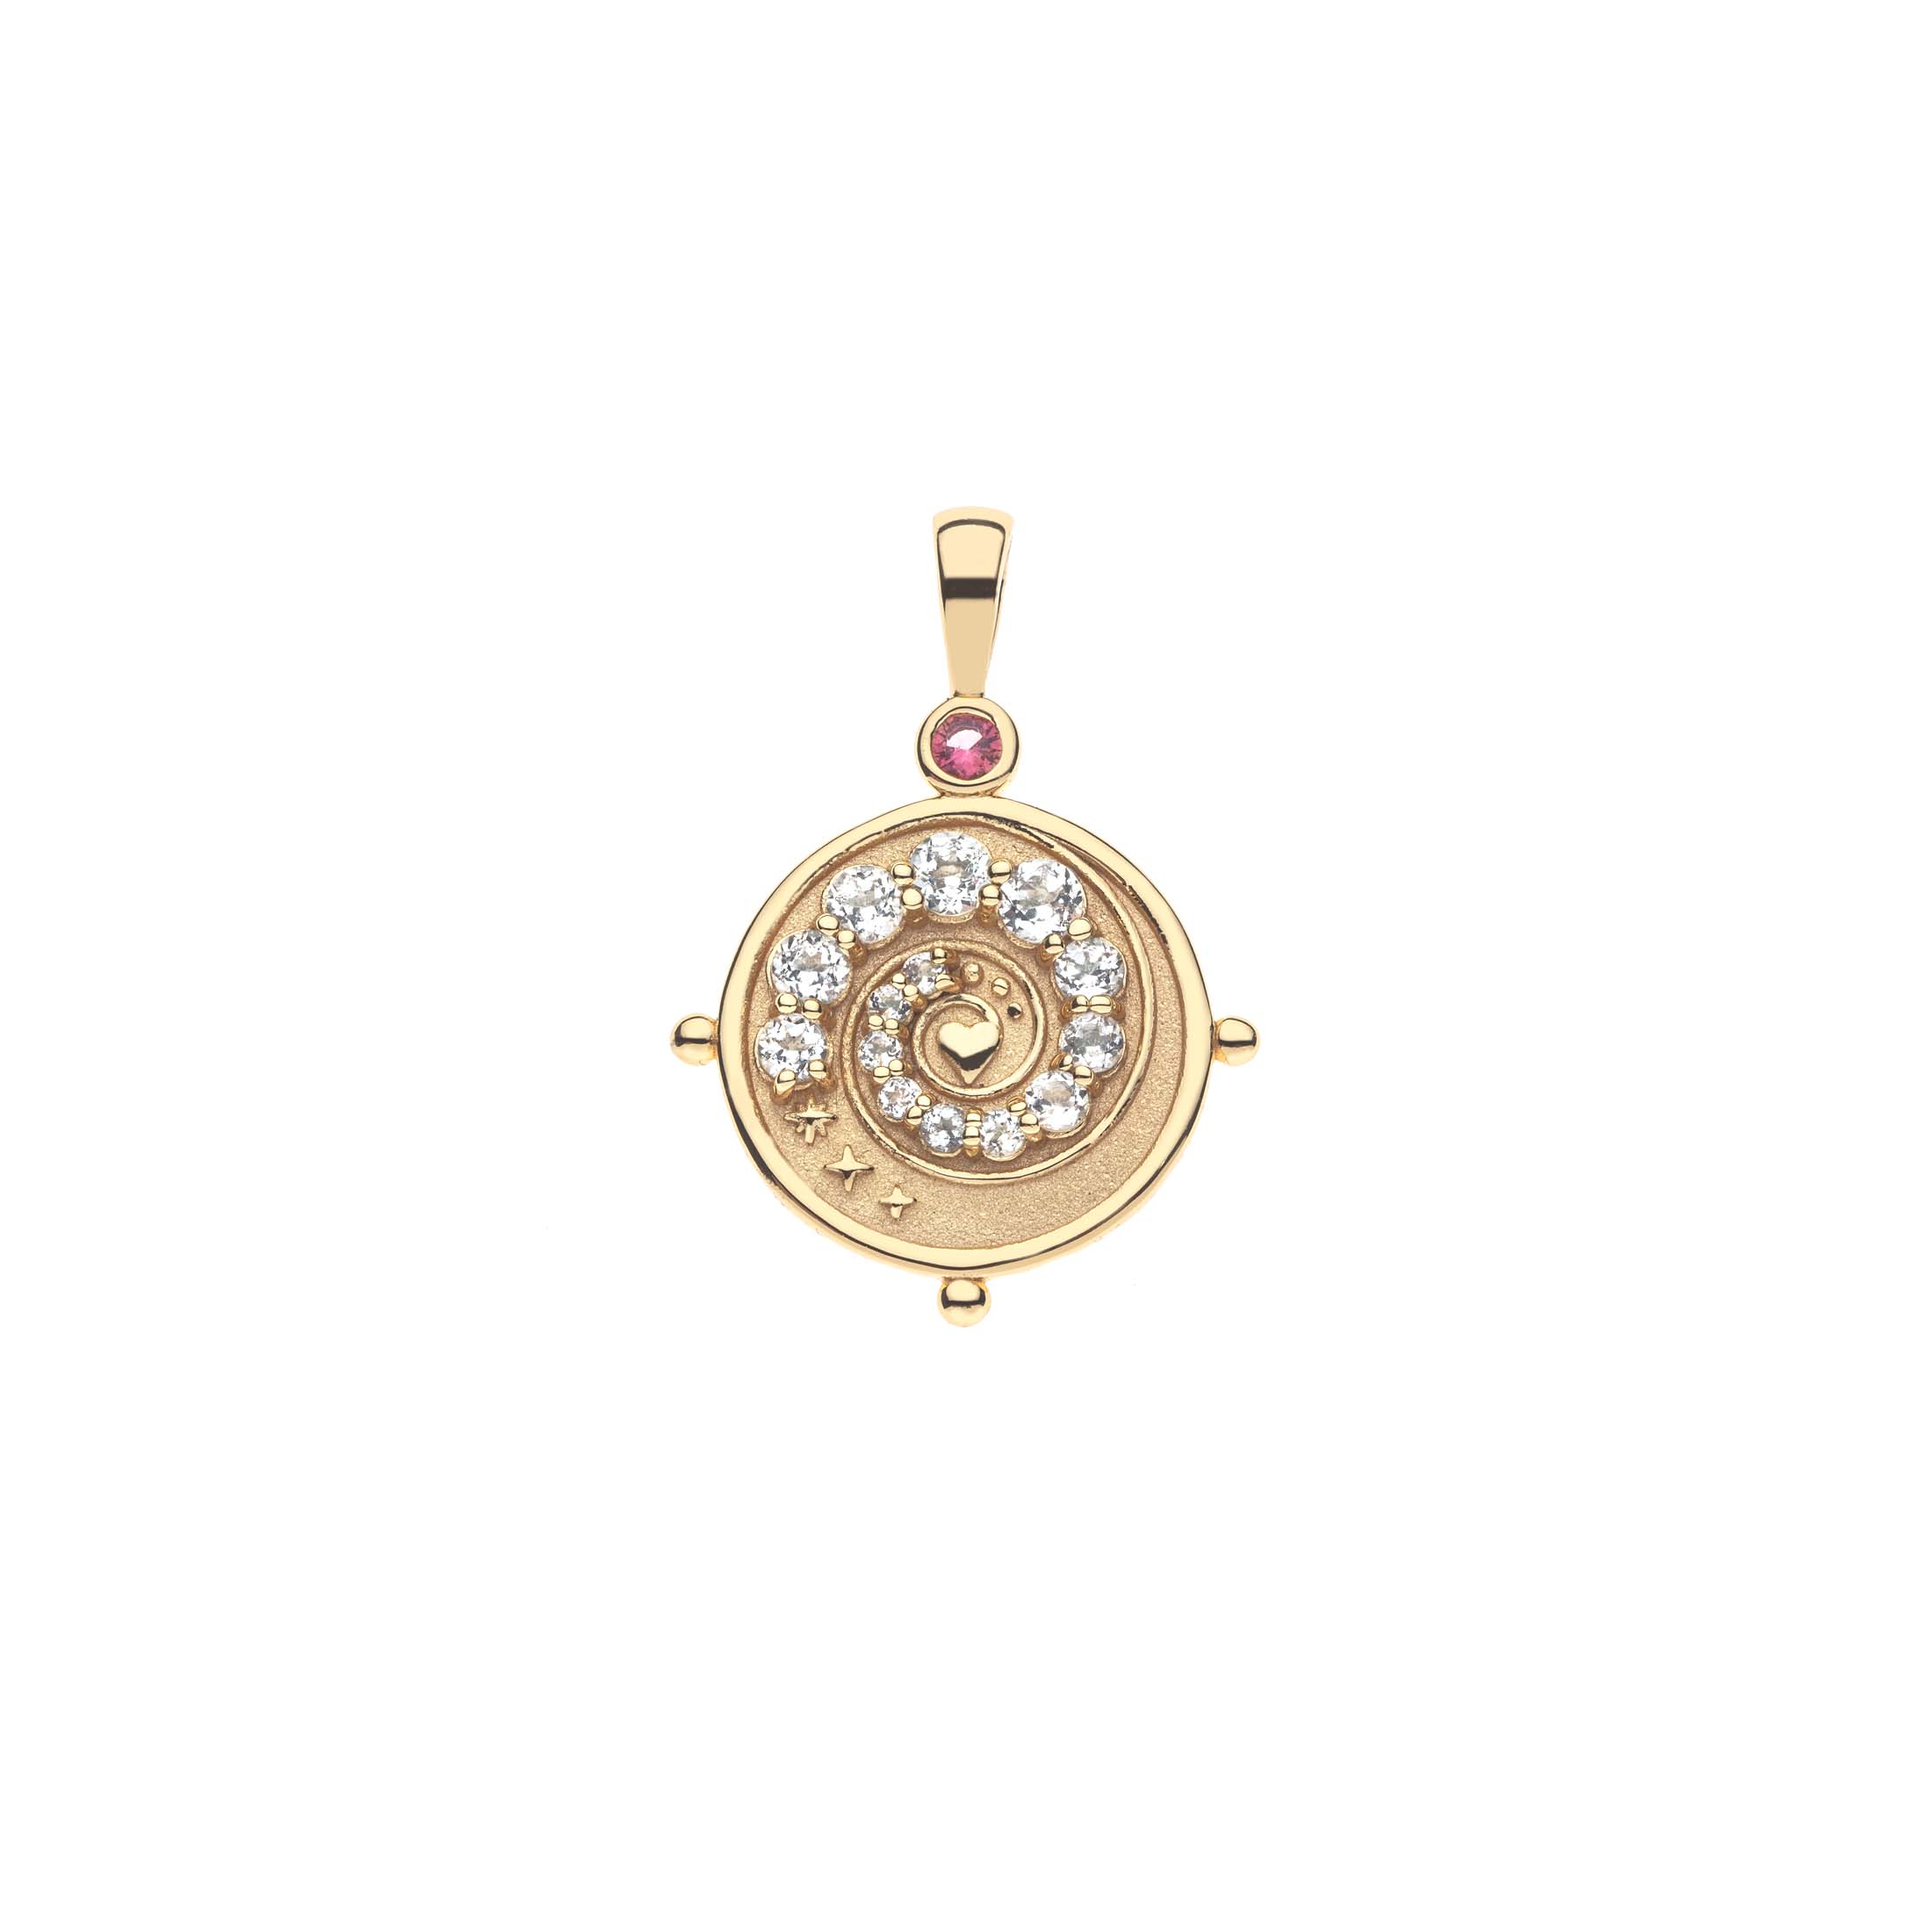 Jane Win INSPIRATION Petite Embellished Coin Pendant Necklace